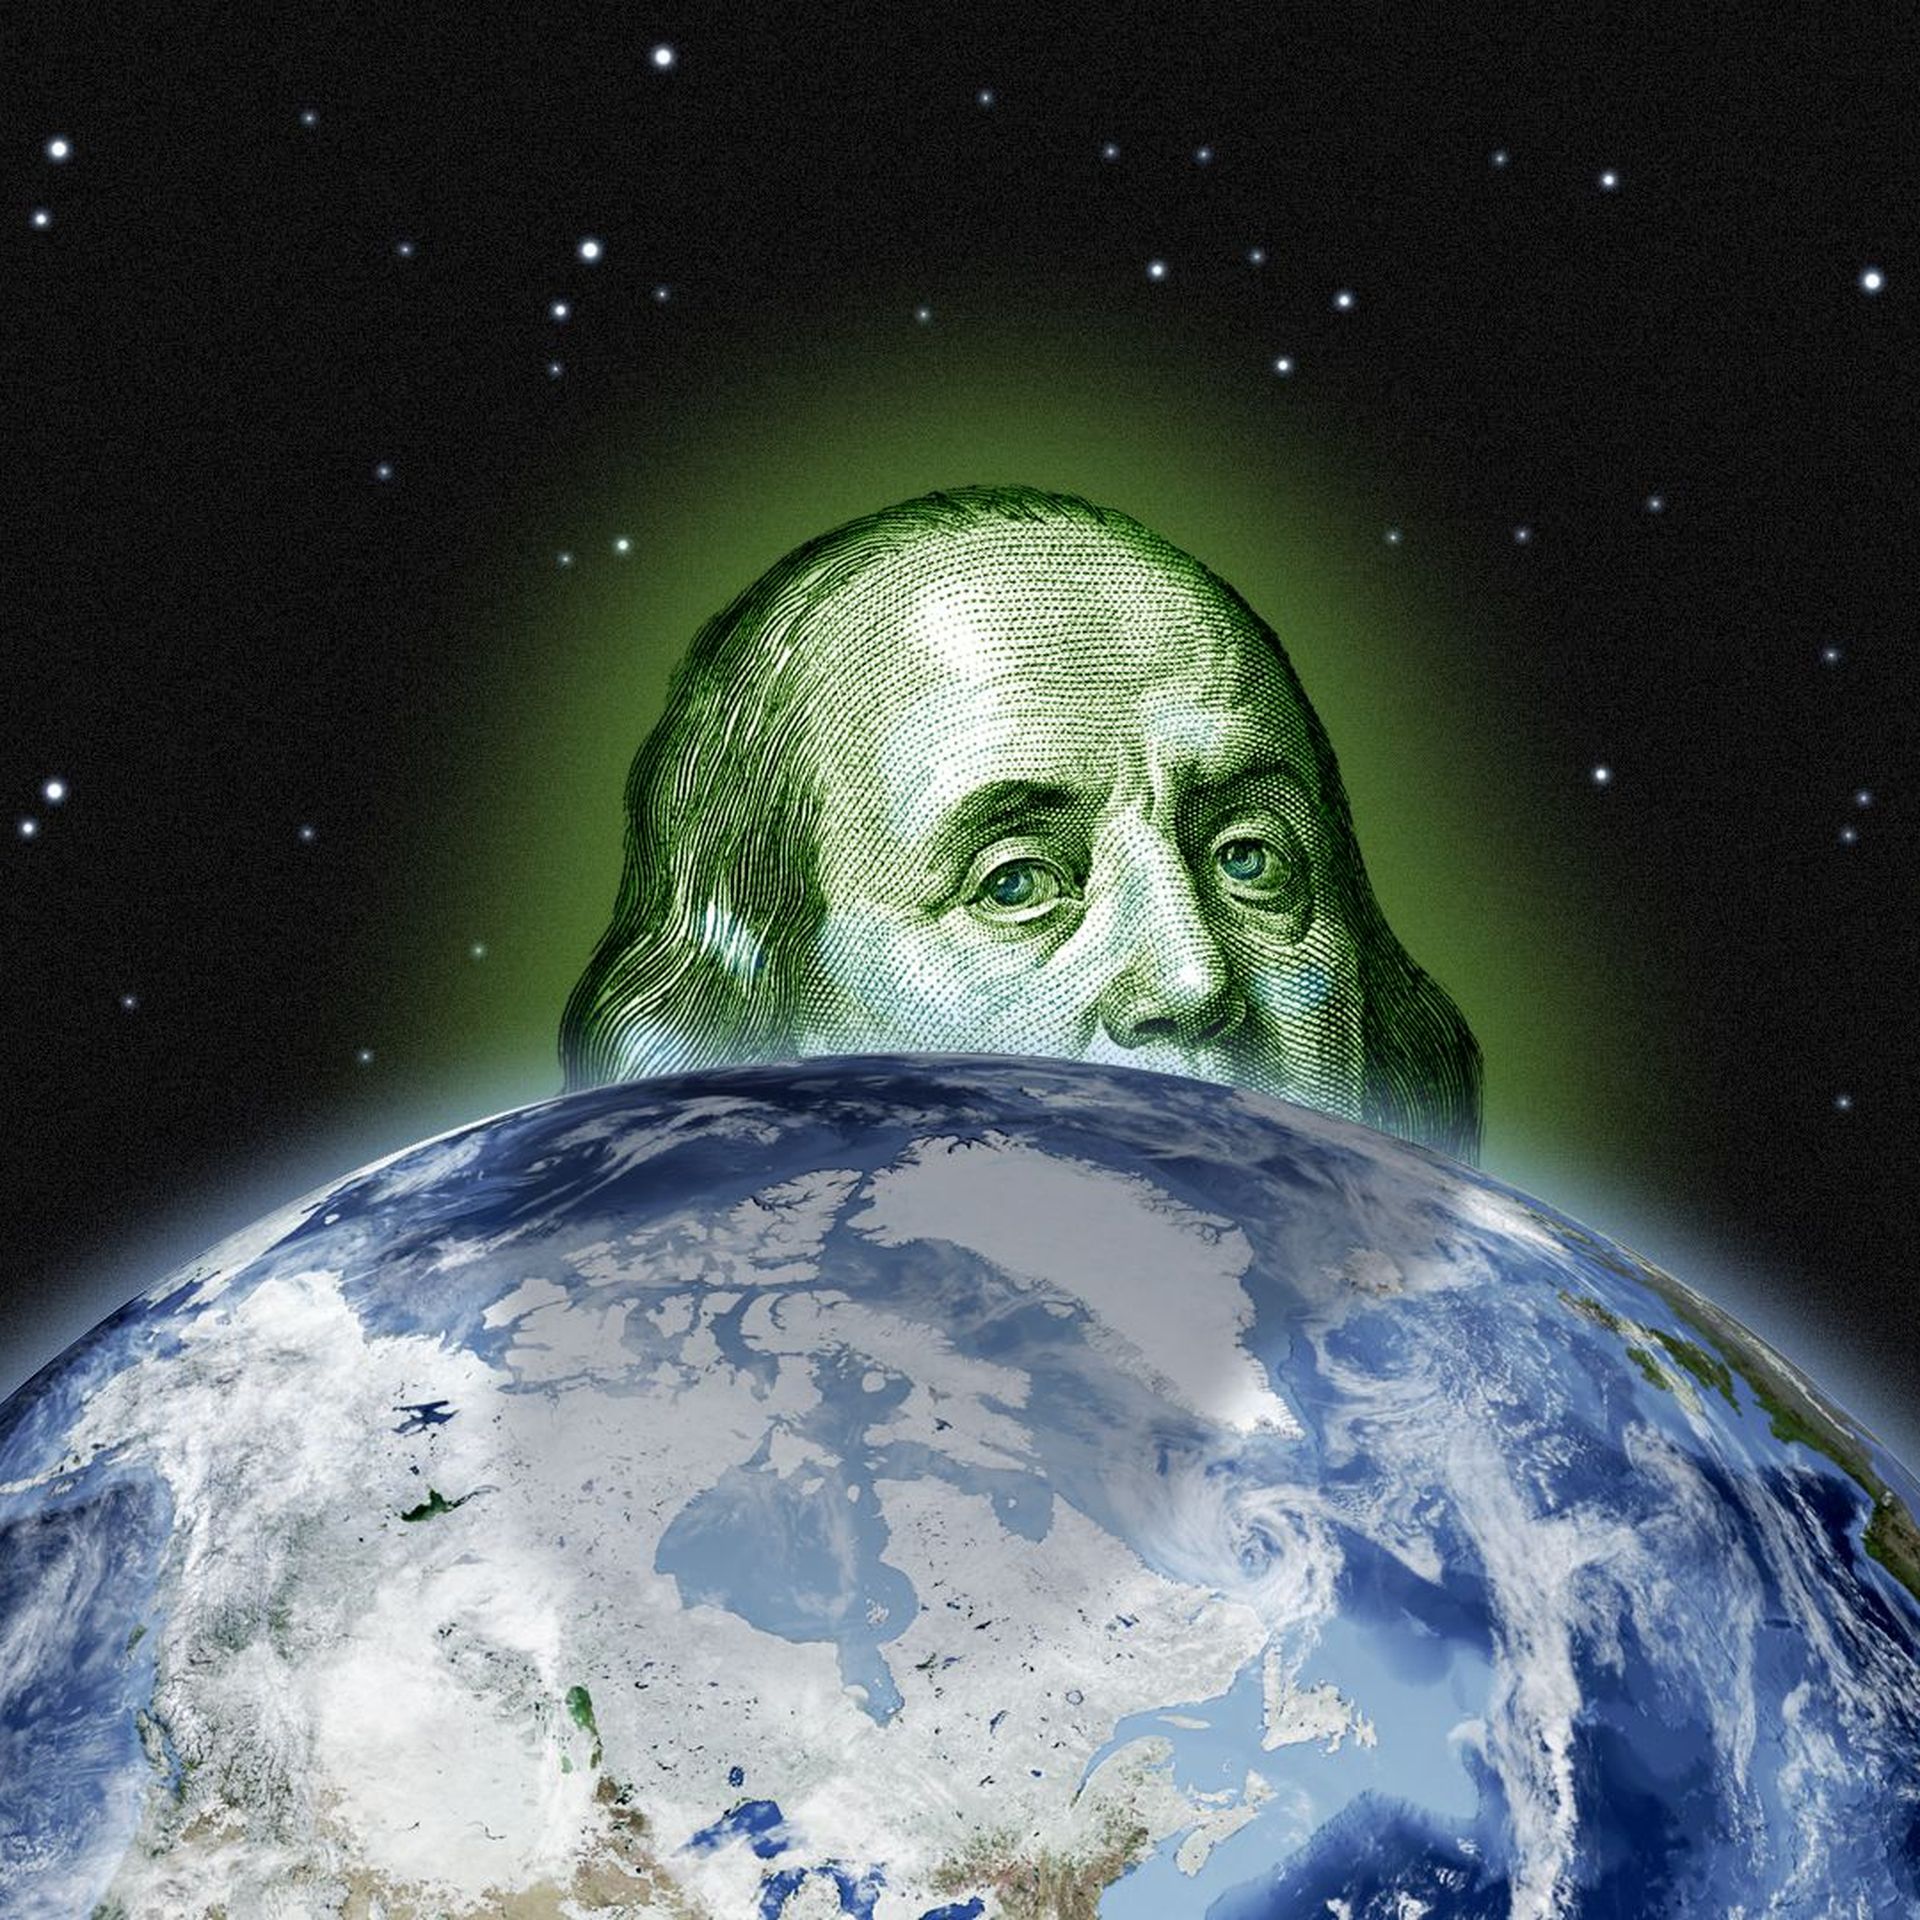 Illustration of a giant Benjamin Franklin peering over the earth